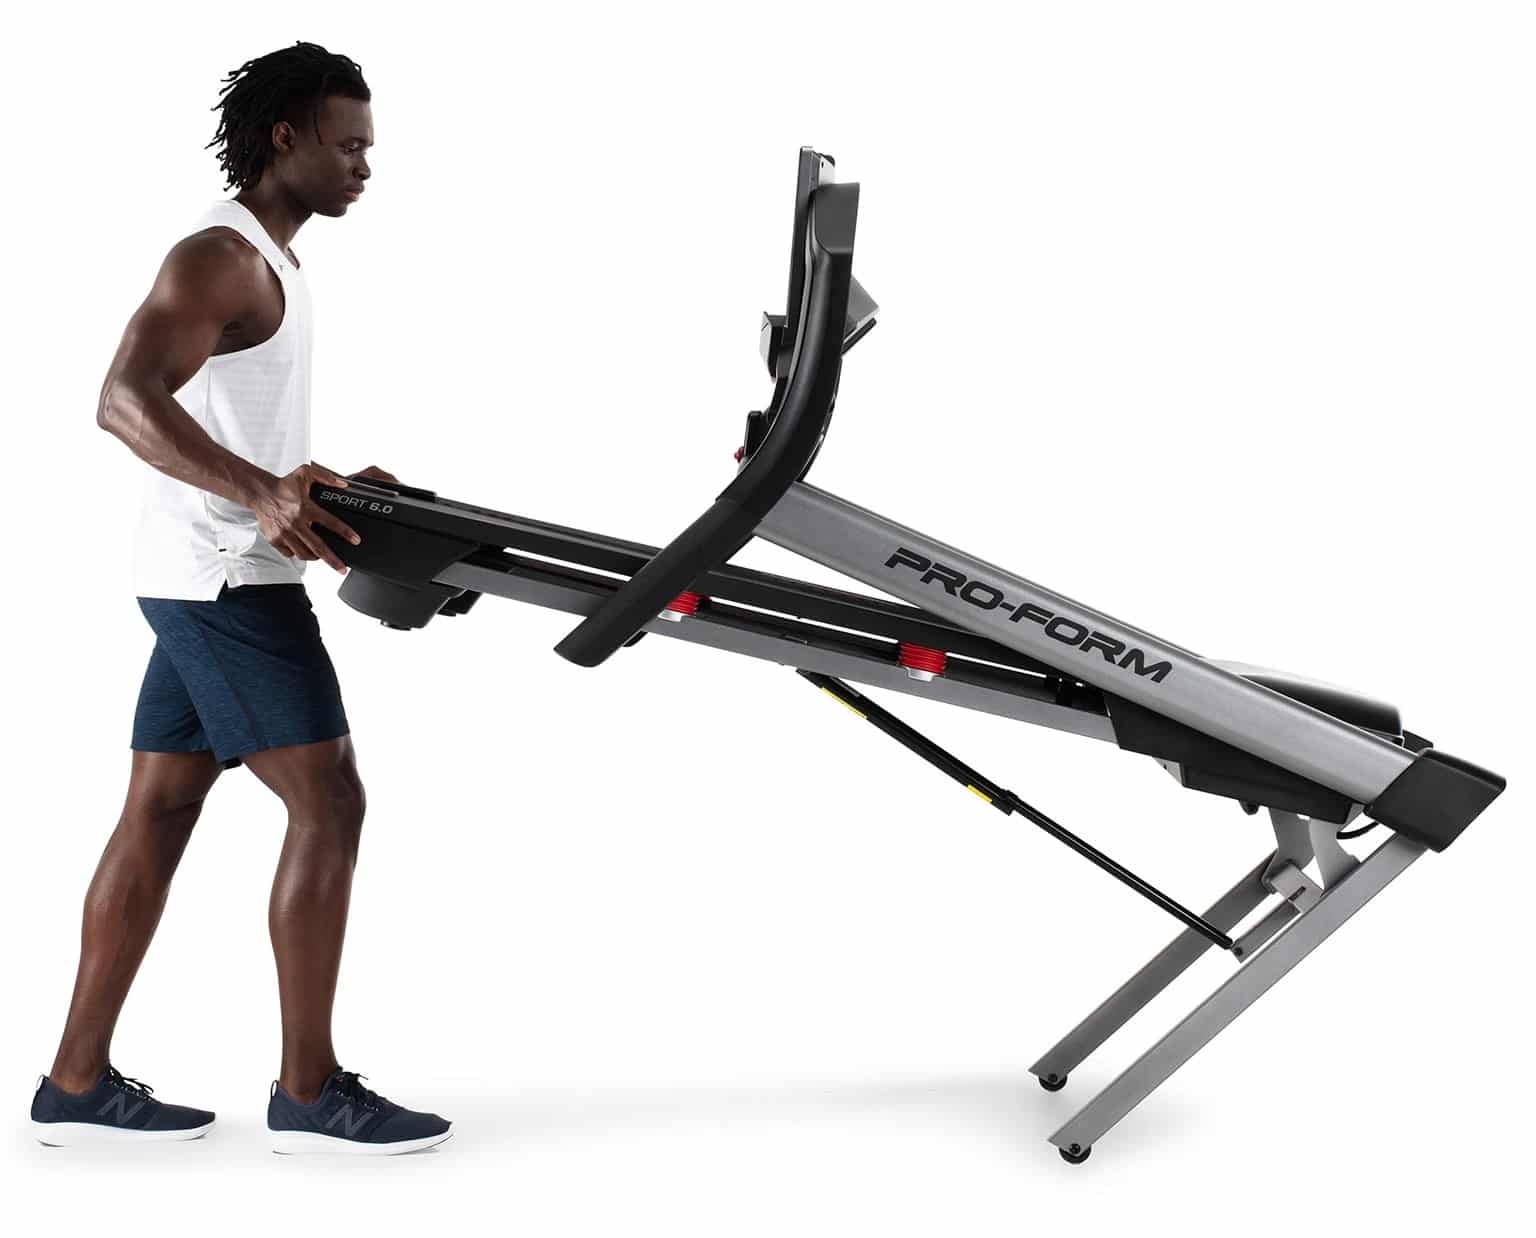 Proform Sport 6.0 folding treadmill - with a male model folding up the machine